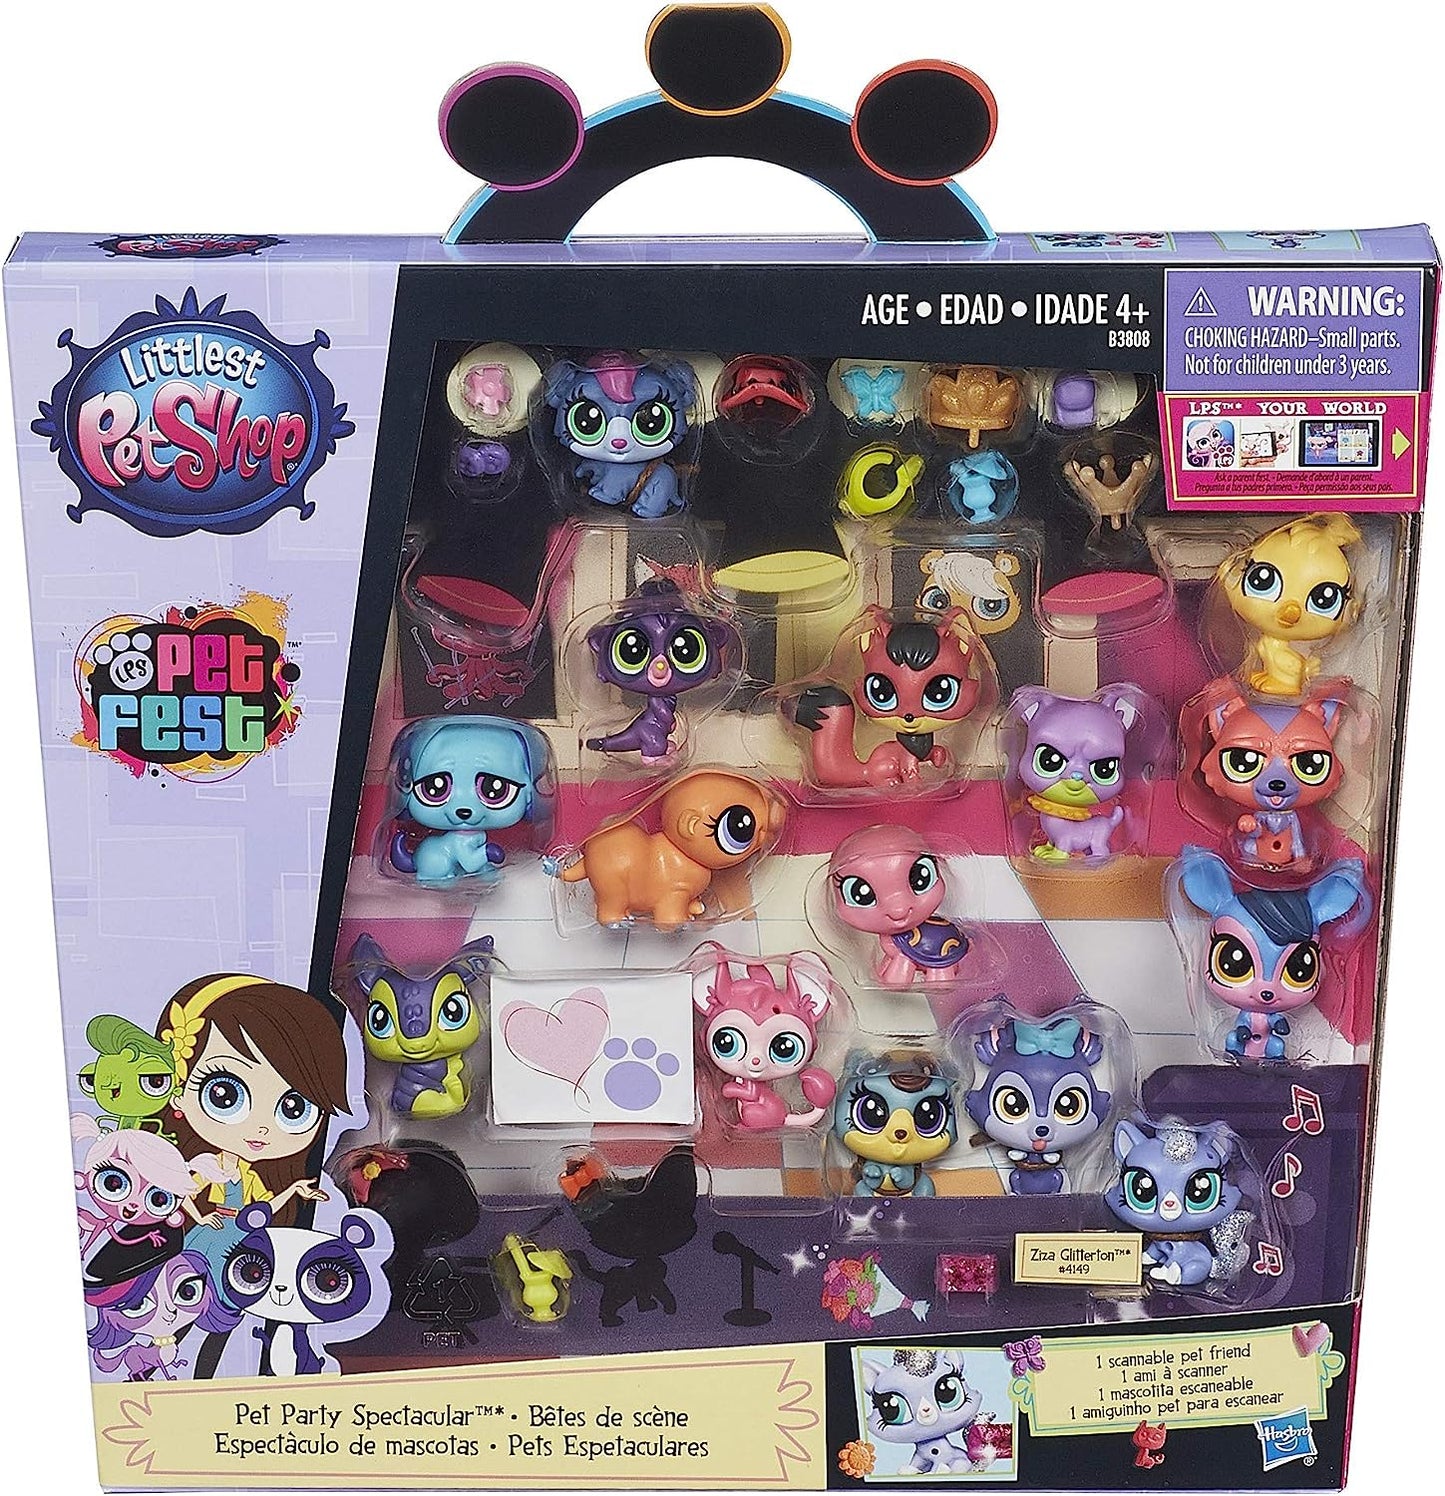 Littlest Pet Shop Party Spectacular Collector Pack Toy, Includes 15 Pets (Amazon Exclusive)